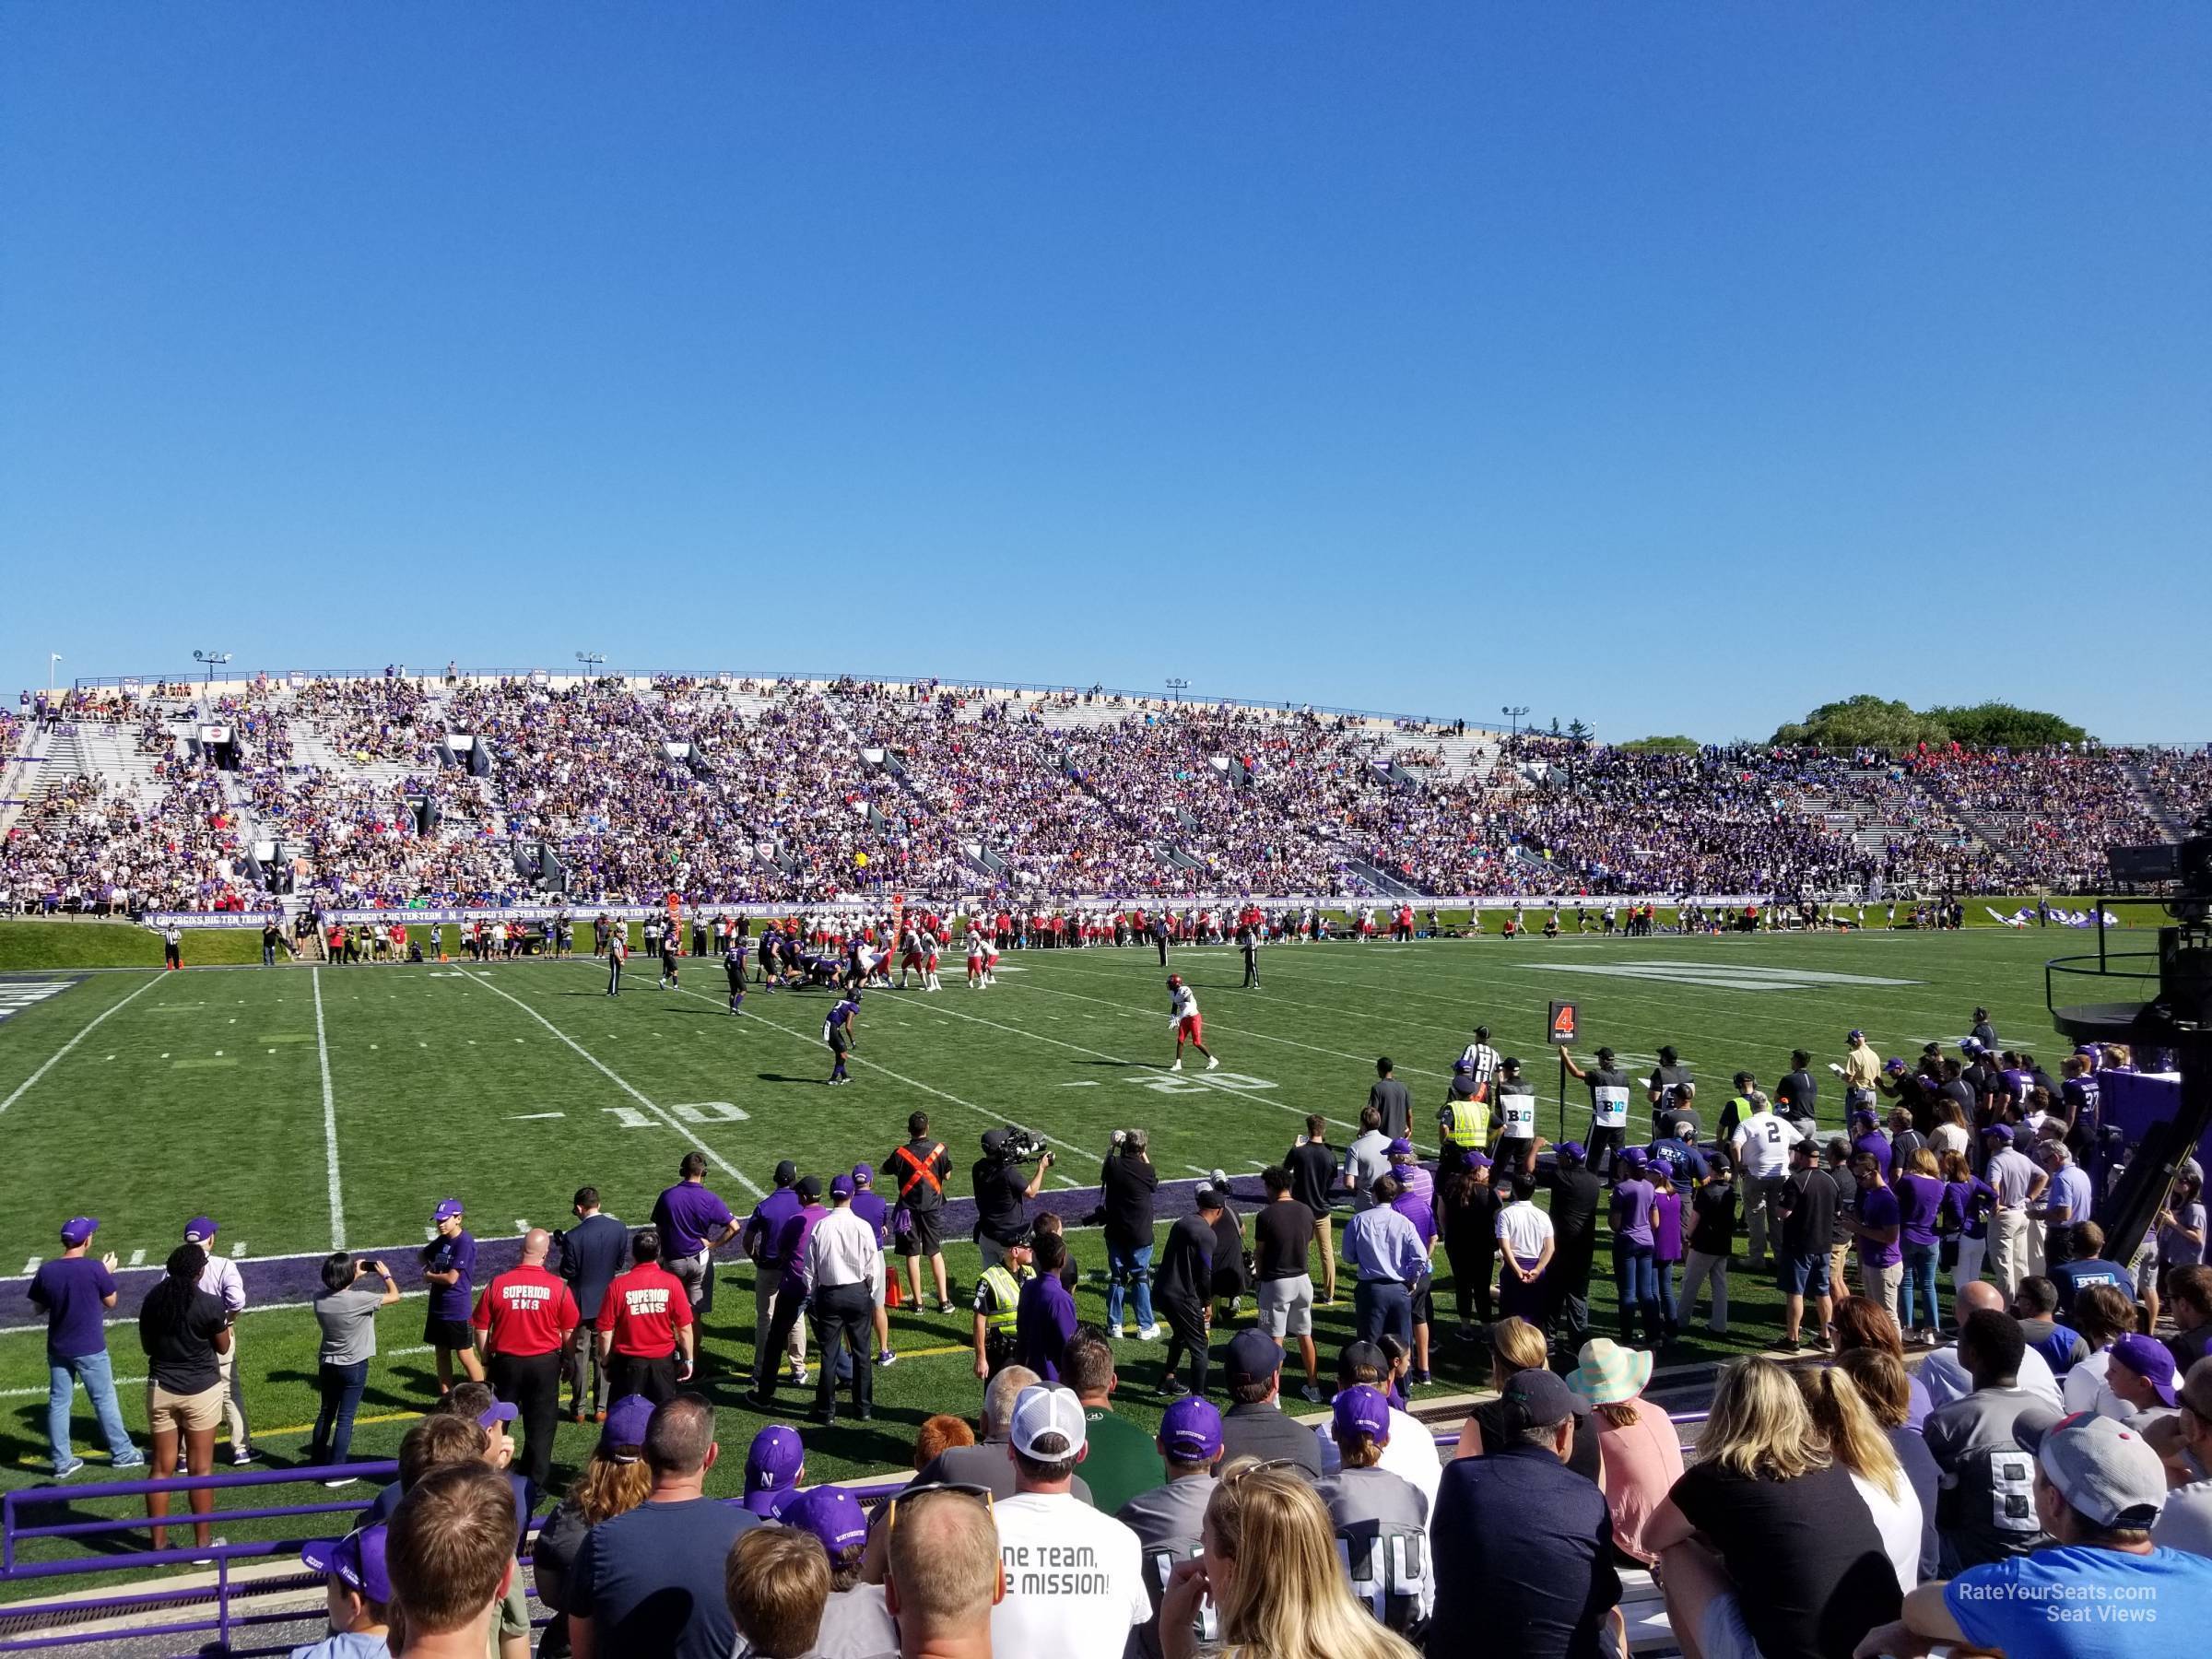 section 132, row 9 seat view  - ryan field